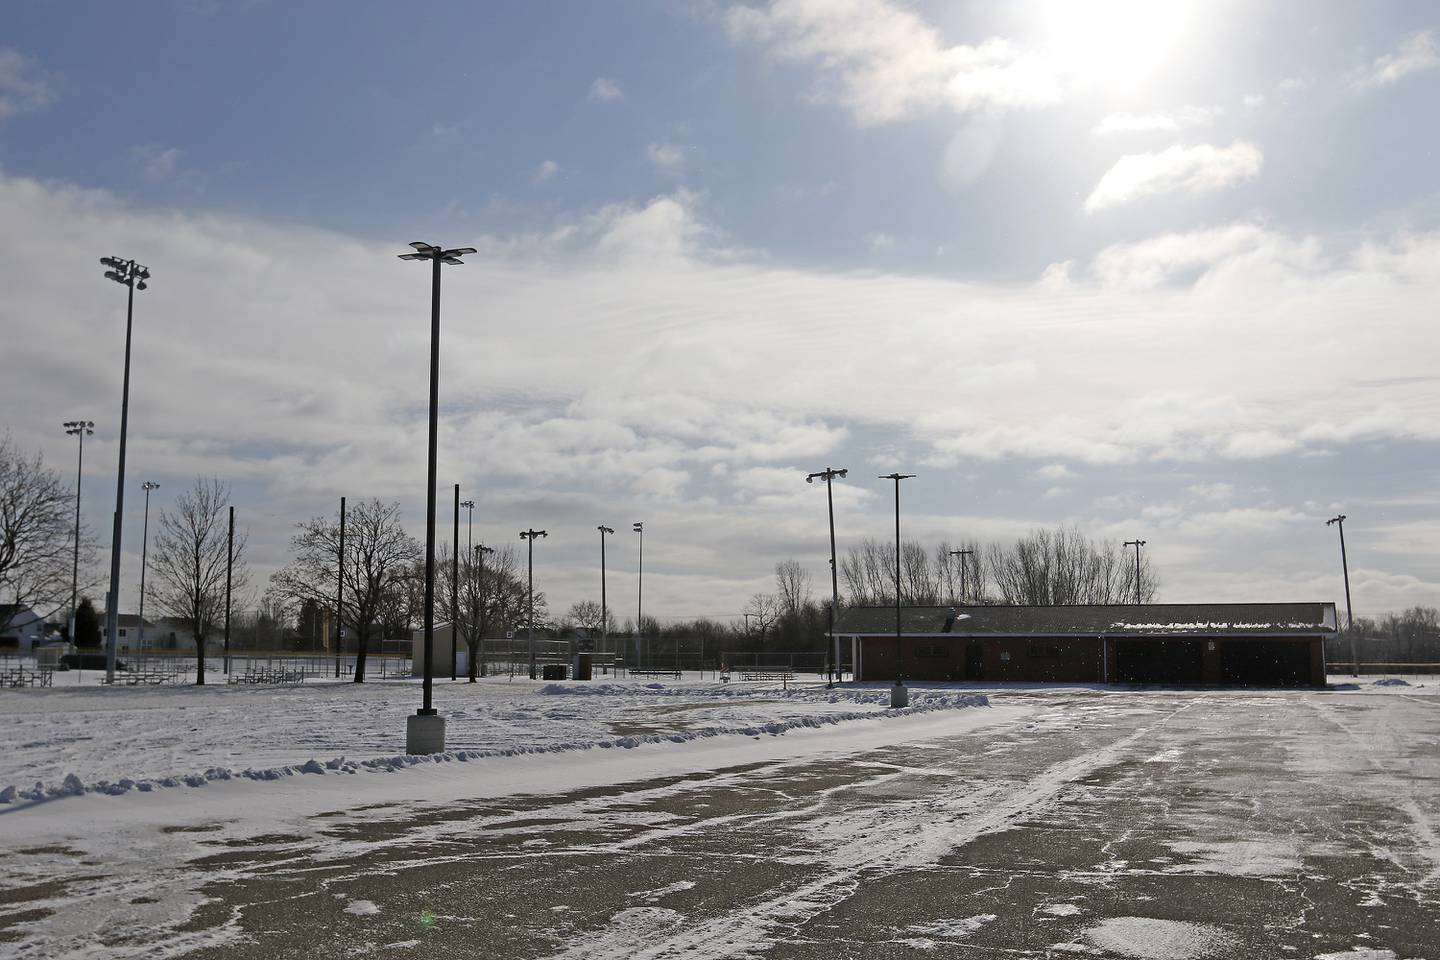 The parking lot at Petersen Park is seen on Wednesday, Jan. 5, 2022 in McHenry. The city staff says the parking lot should be replaced this year to the tune of $225,000.